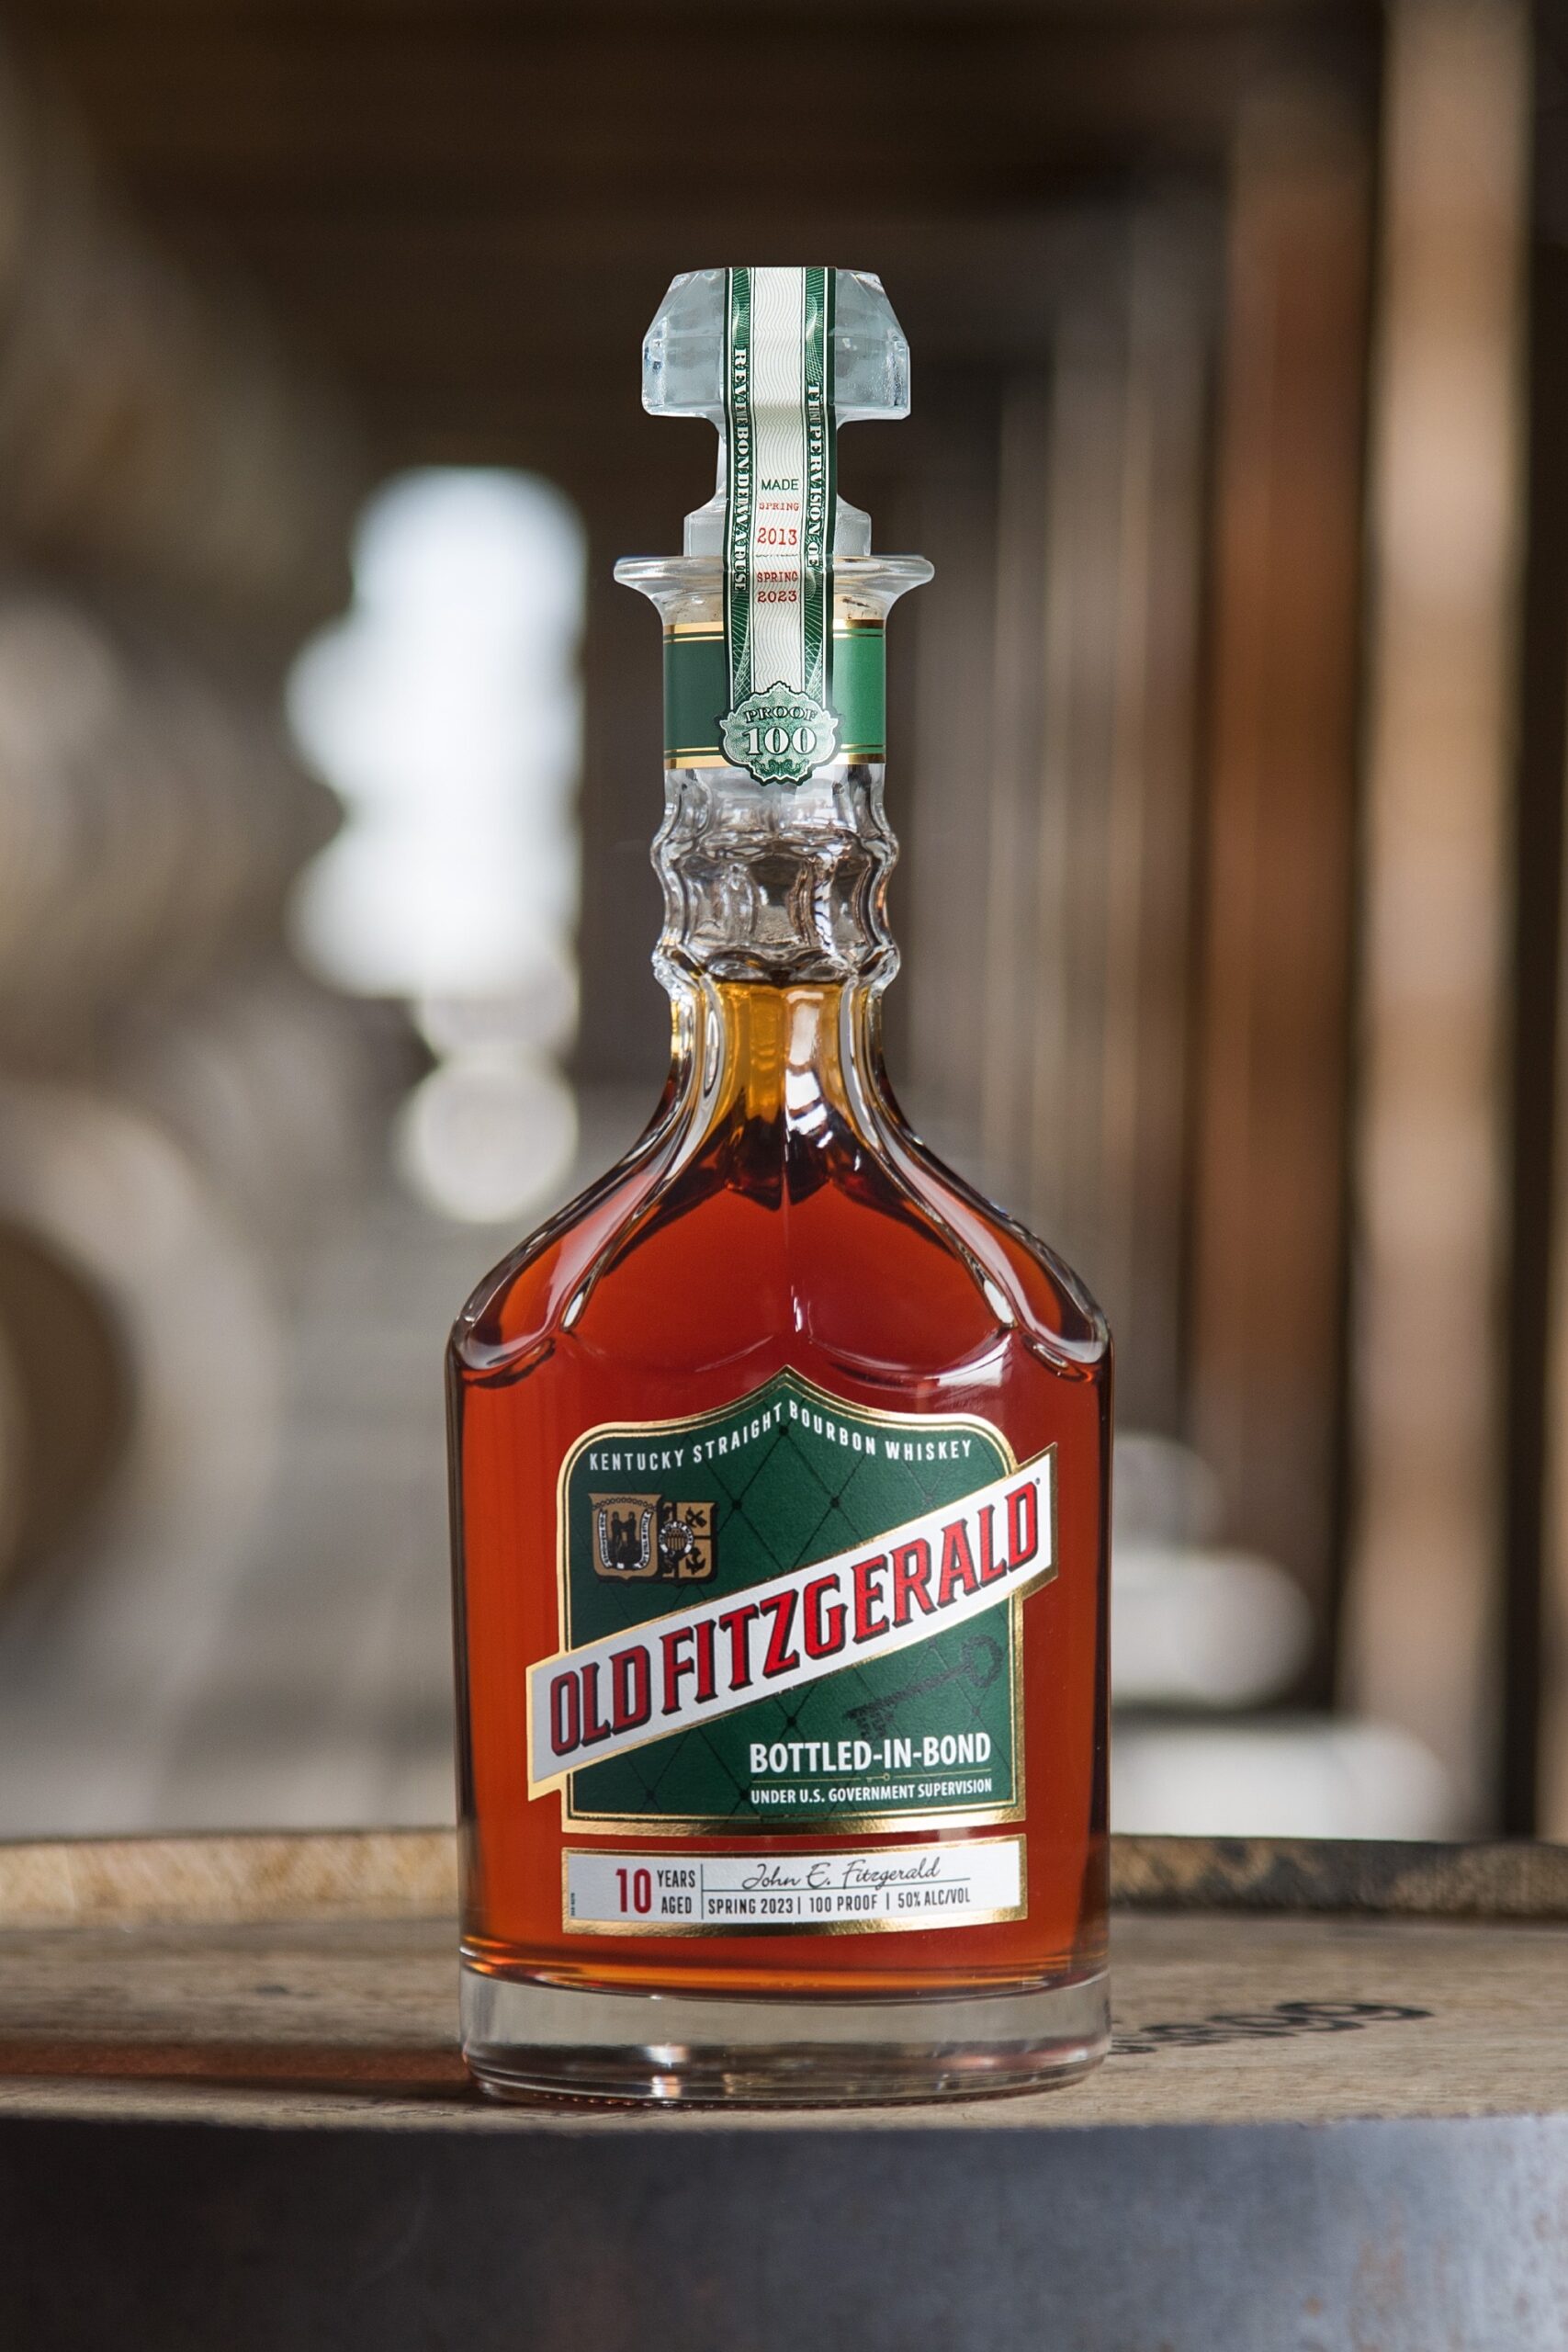 Old Fitzgerald Bottled-in-Bond Bourbon as featured in the Bourbon Lens Podcast